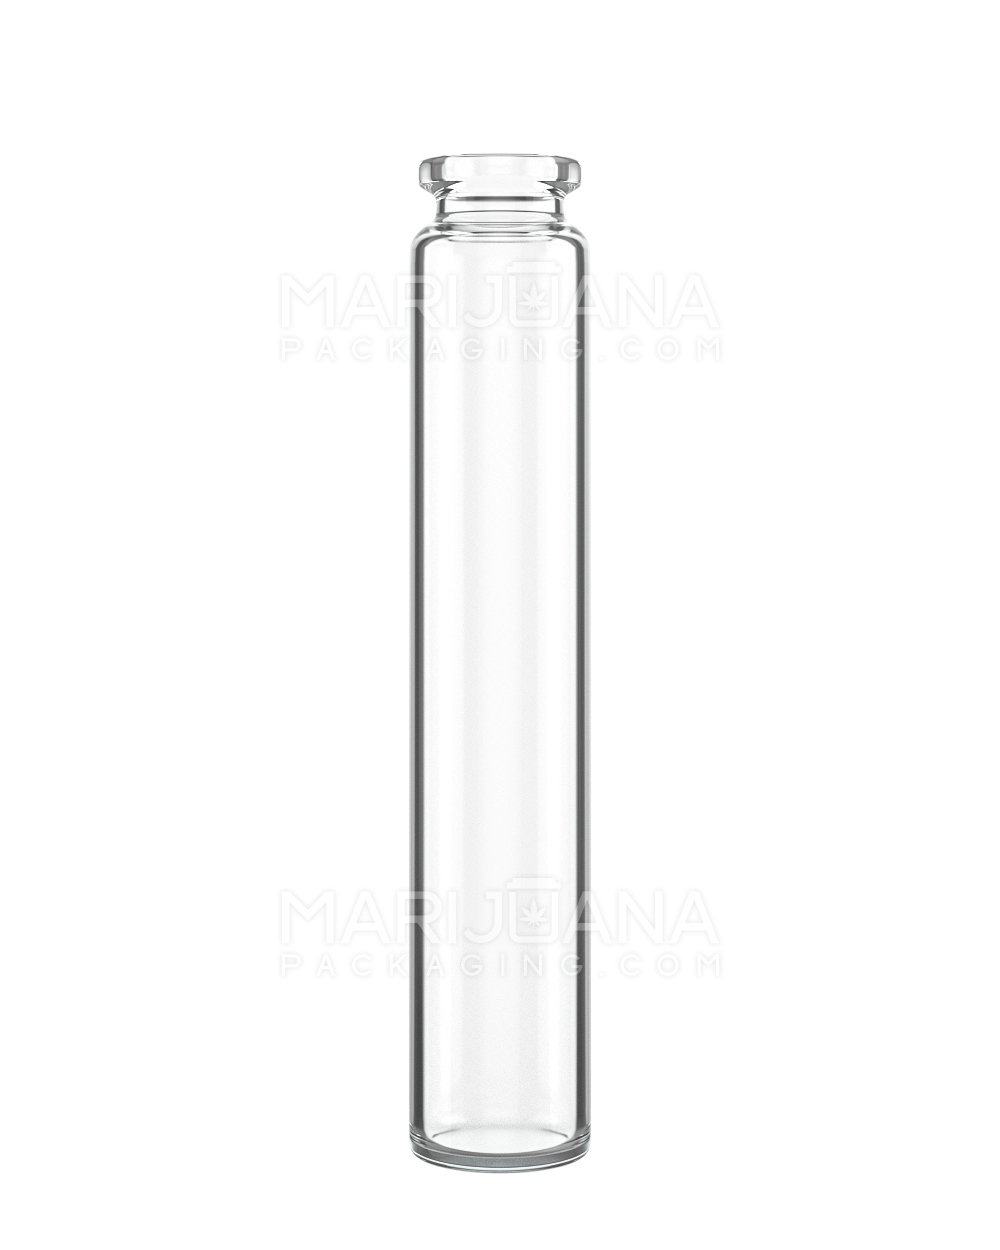 Glass Pre-Roll Tube with Cork Top | 120mm - Clear Glass - 586 Count - 6